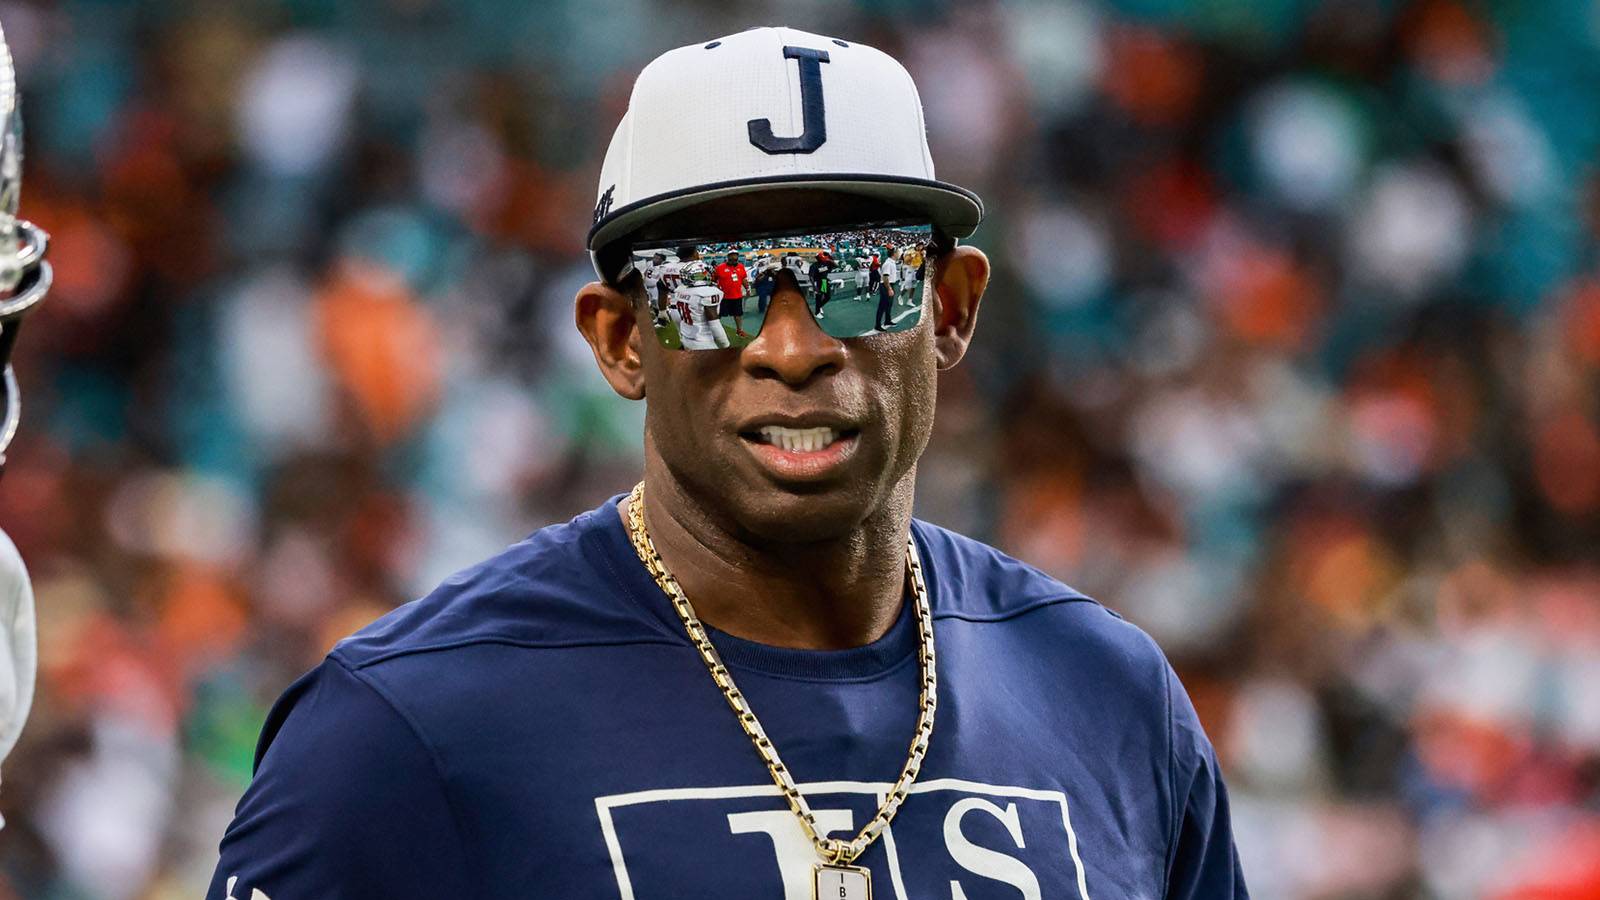 Deion Sanders wearing a blue shirt and white cap